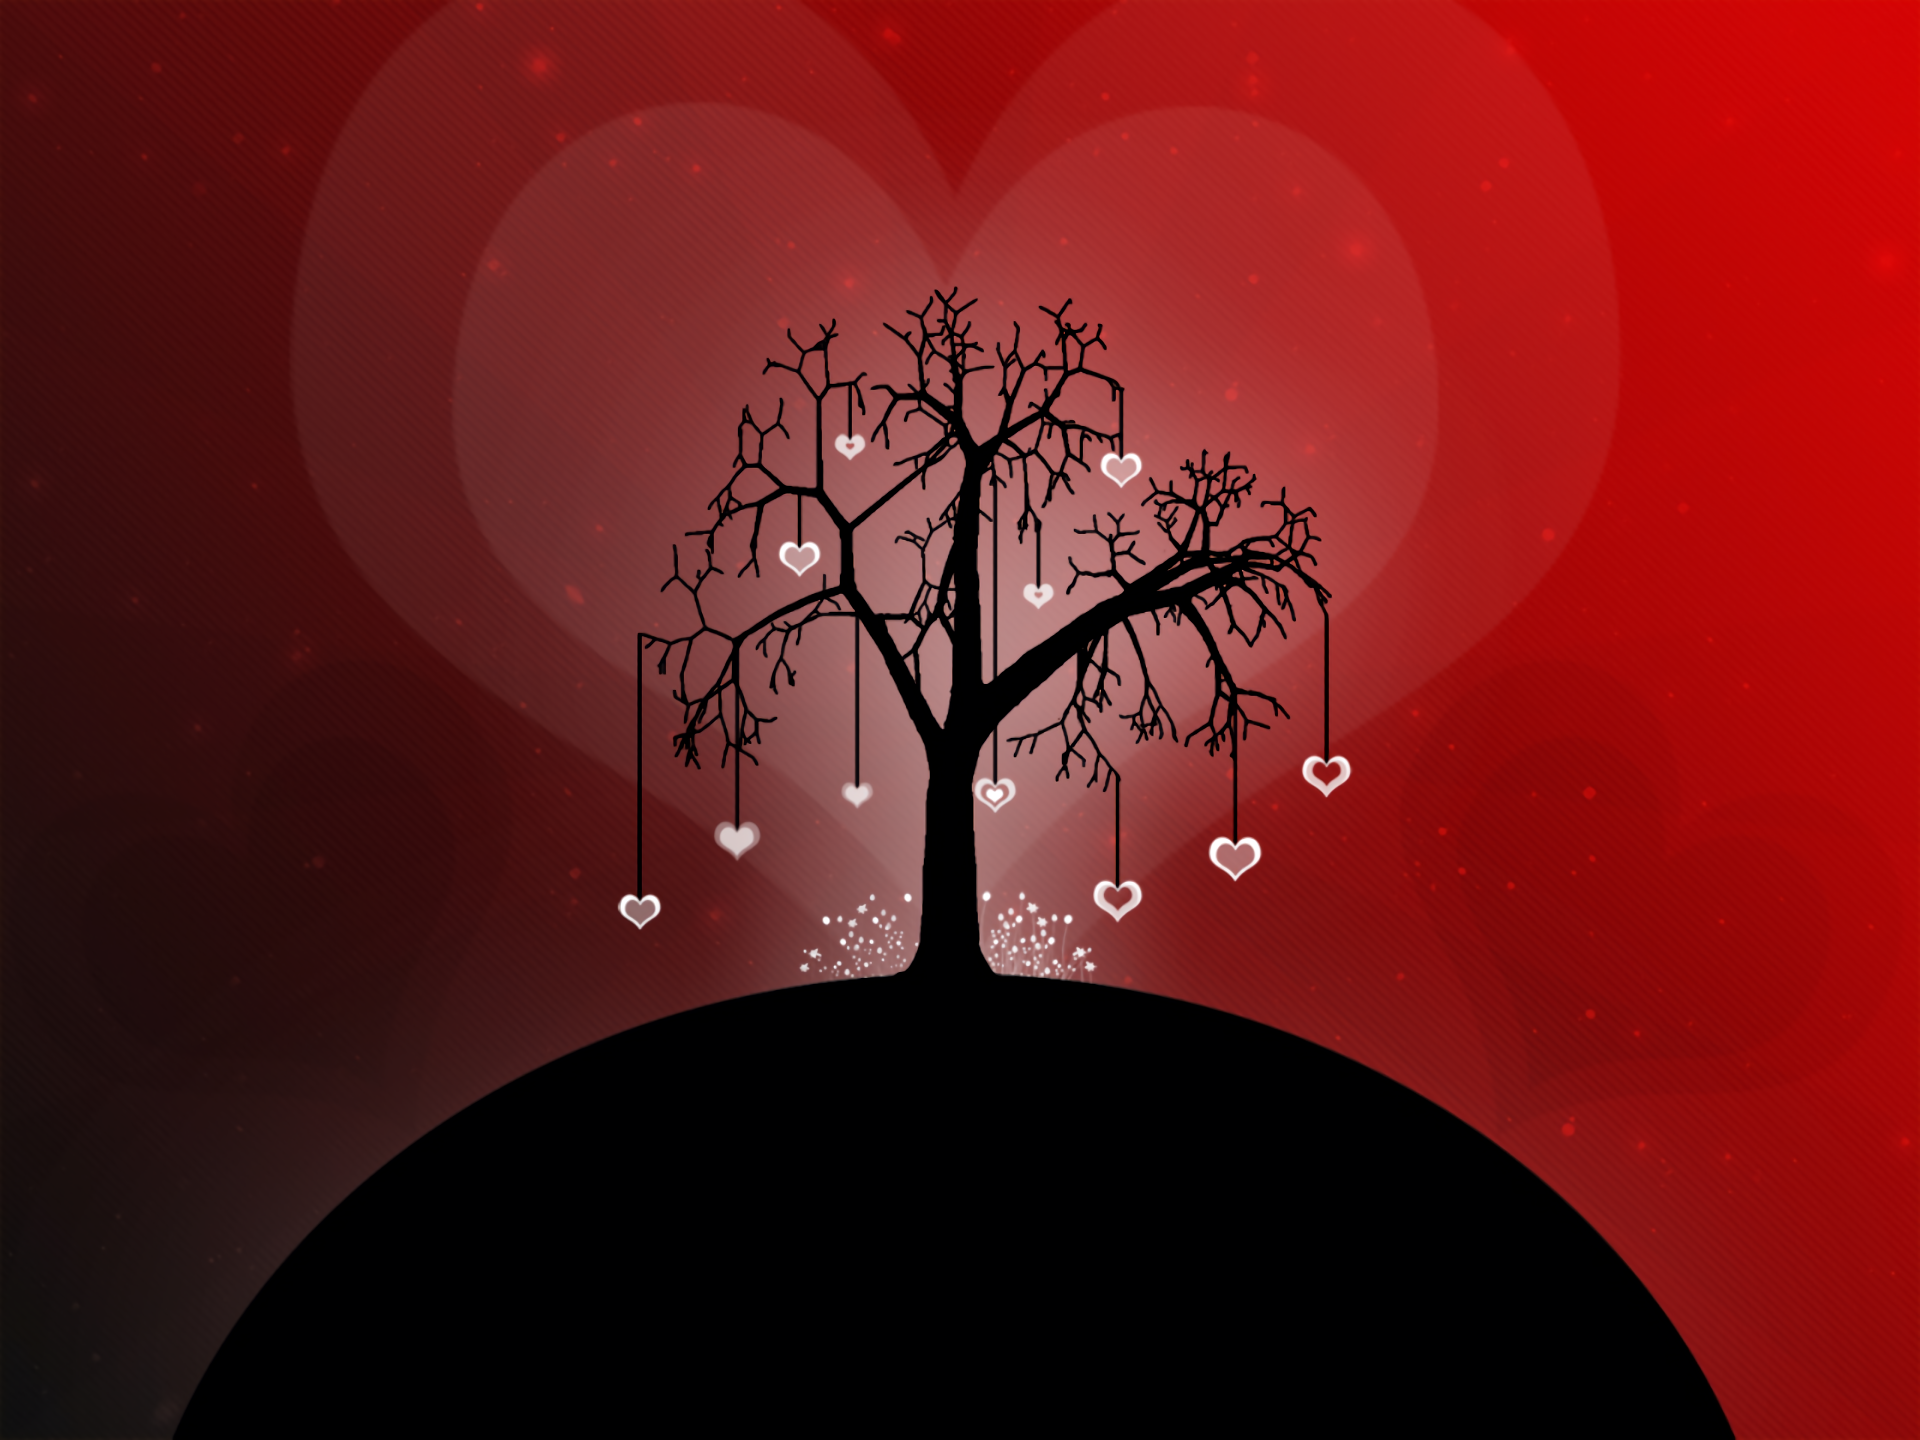 670+ Artistic Love HD Wallpapers and Backgrounds